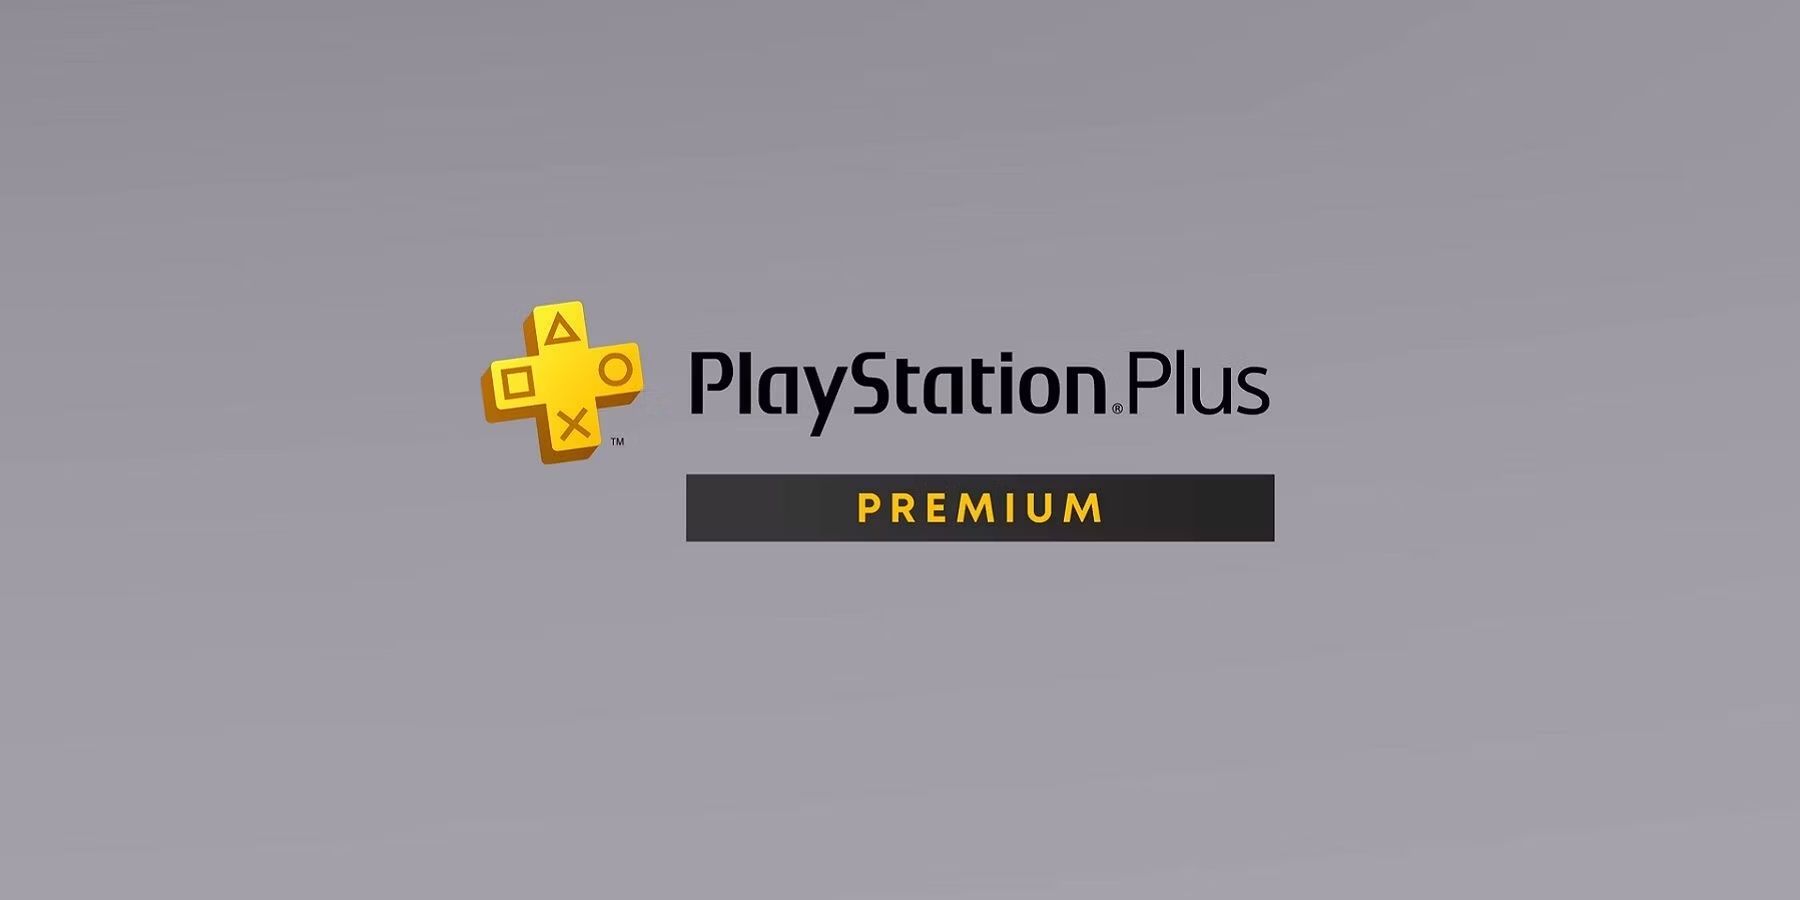 PS Plus Extra and Premium of November 2023 have been announced